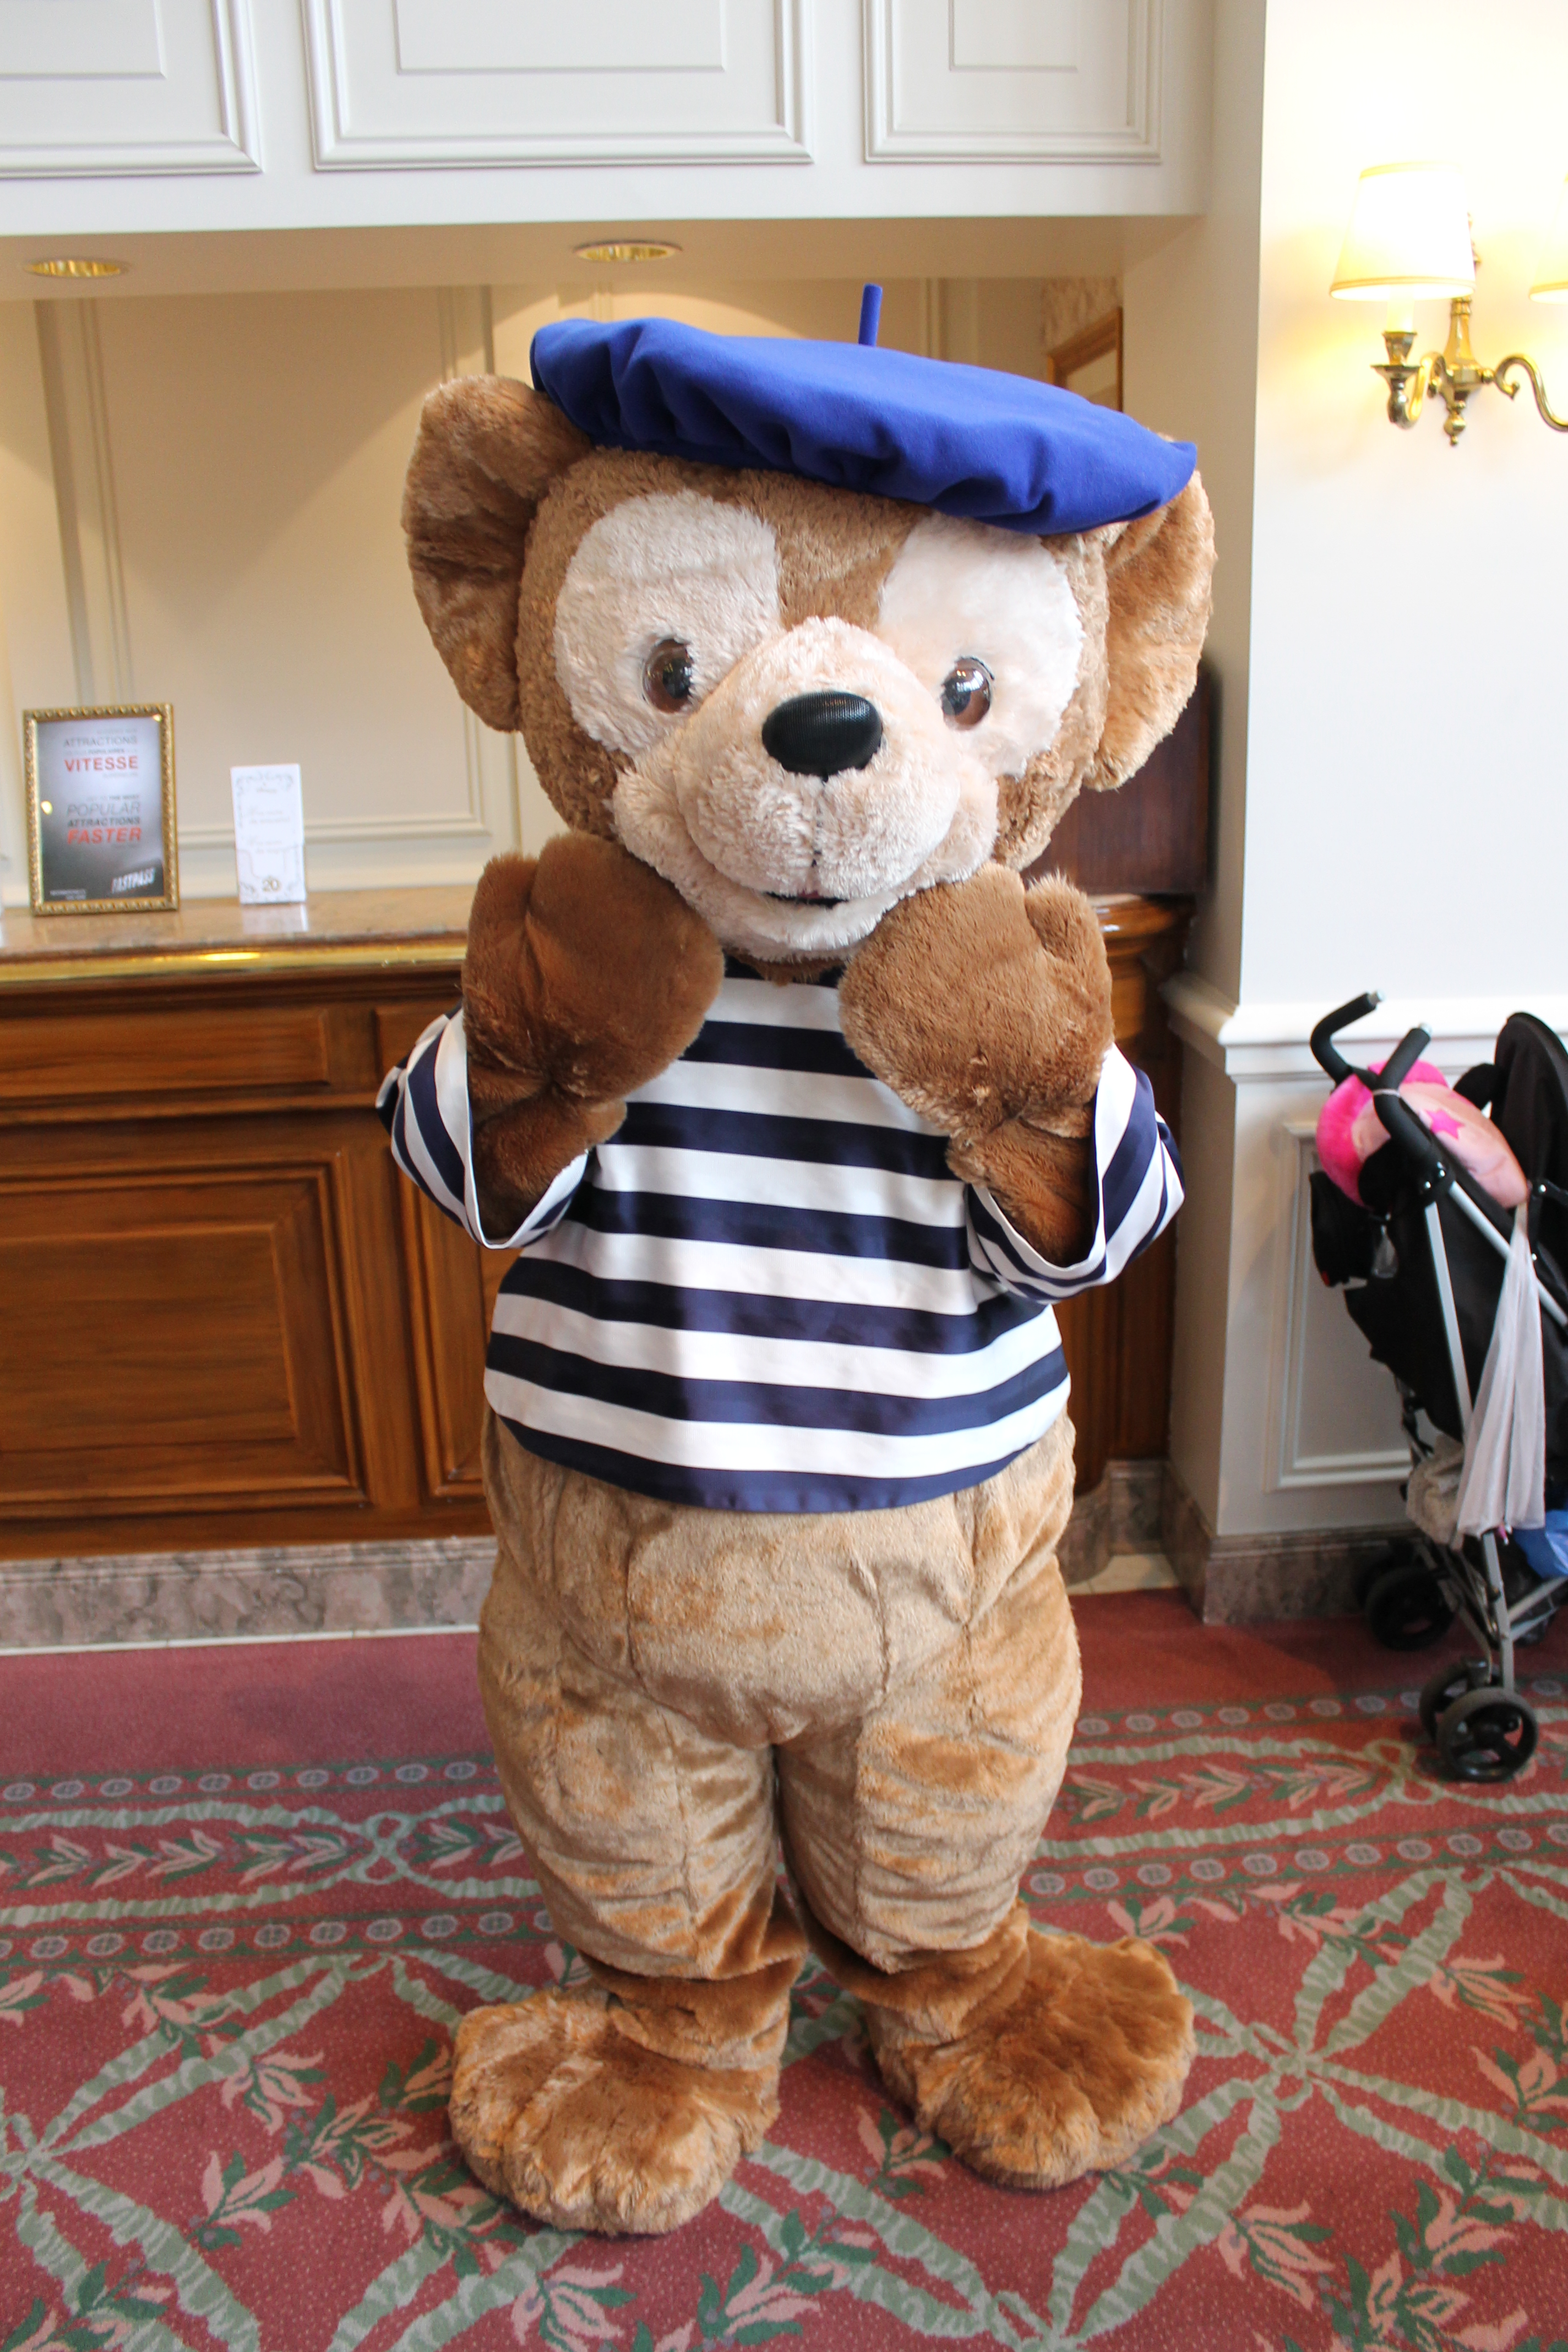 Duffy can be found at the Disneyland Hotel occasionally wearing his French outfit. This is the blue version, there is also a red version.